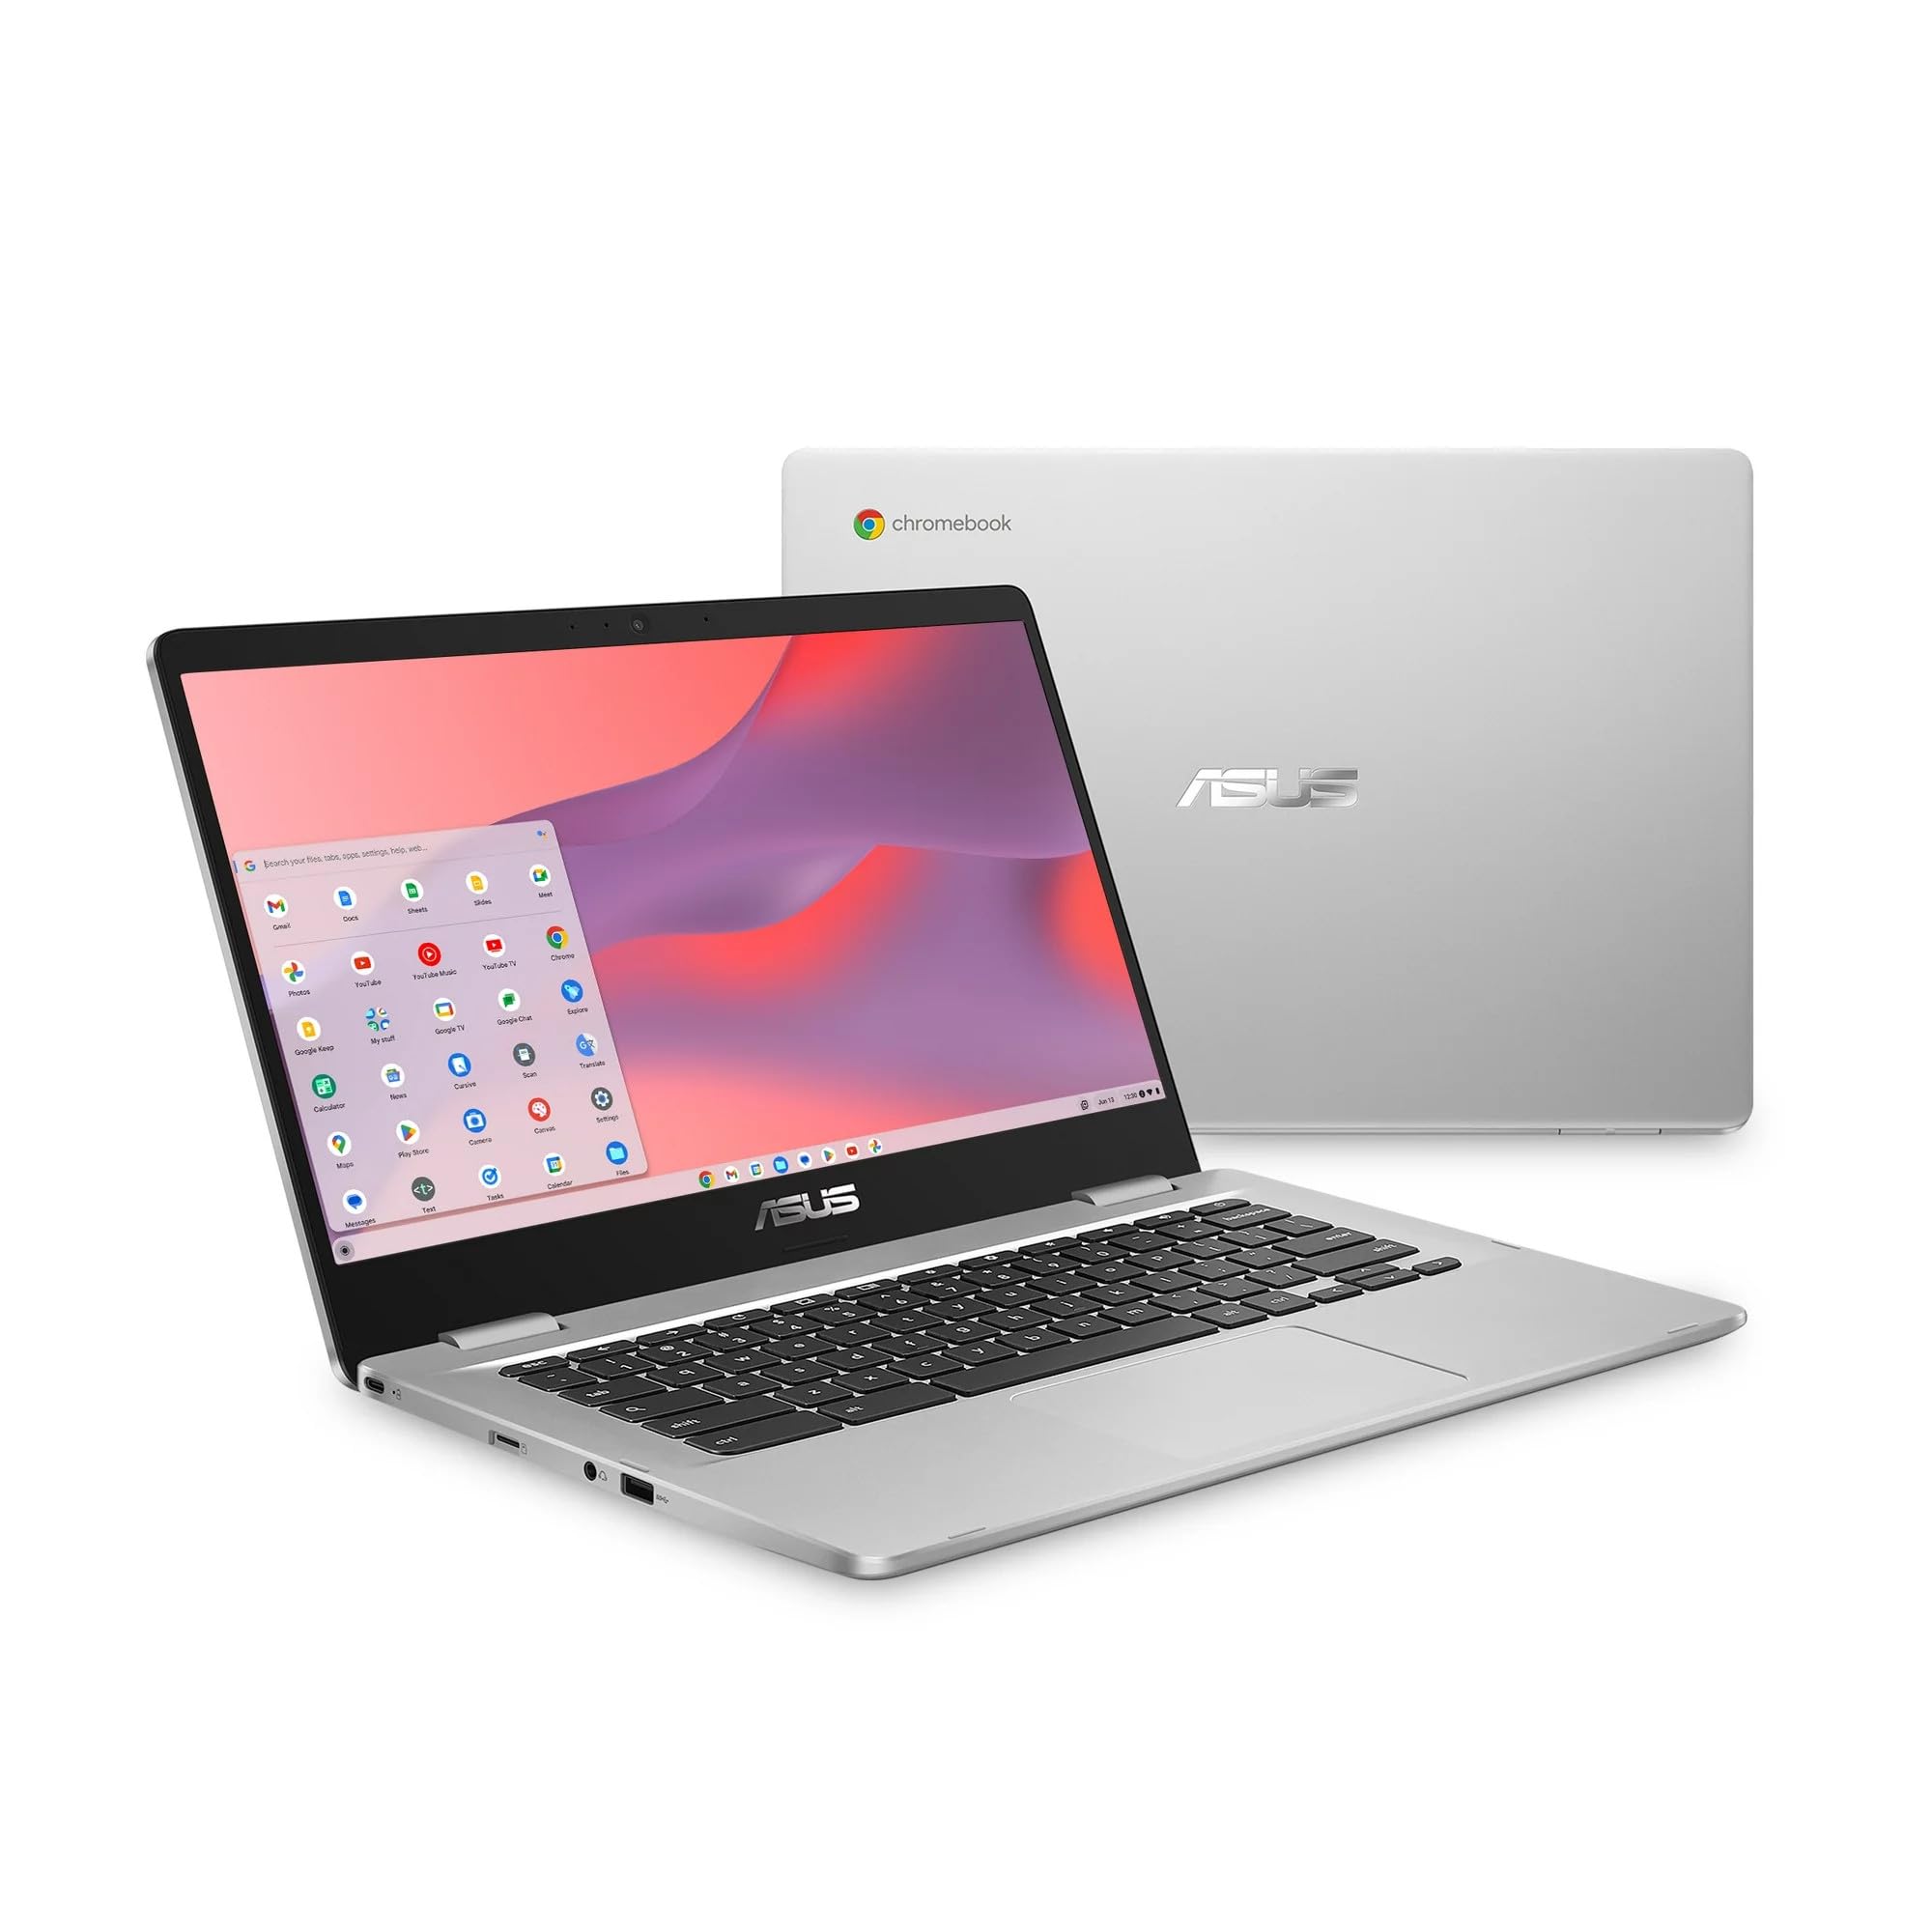 ASUS Flagship Chromebook 14 FHD Student Laptop, Intel Celeron N4020 (2 Core, Up to 2.8GHz), 4GB RAM, 64GB eMMC, Wi-Fi, Webcam, Bluetooth, Zoom Meeting, 10 Hours Battery, Chrome OS, w/GM Accessory